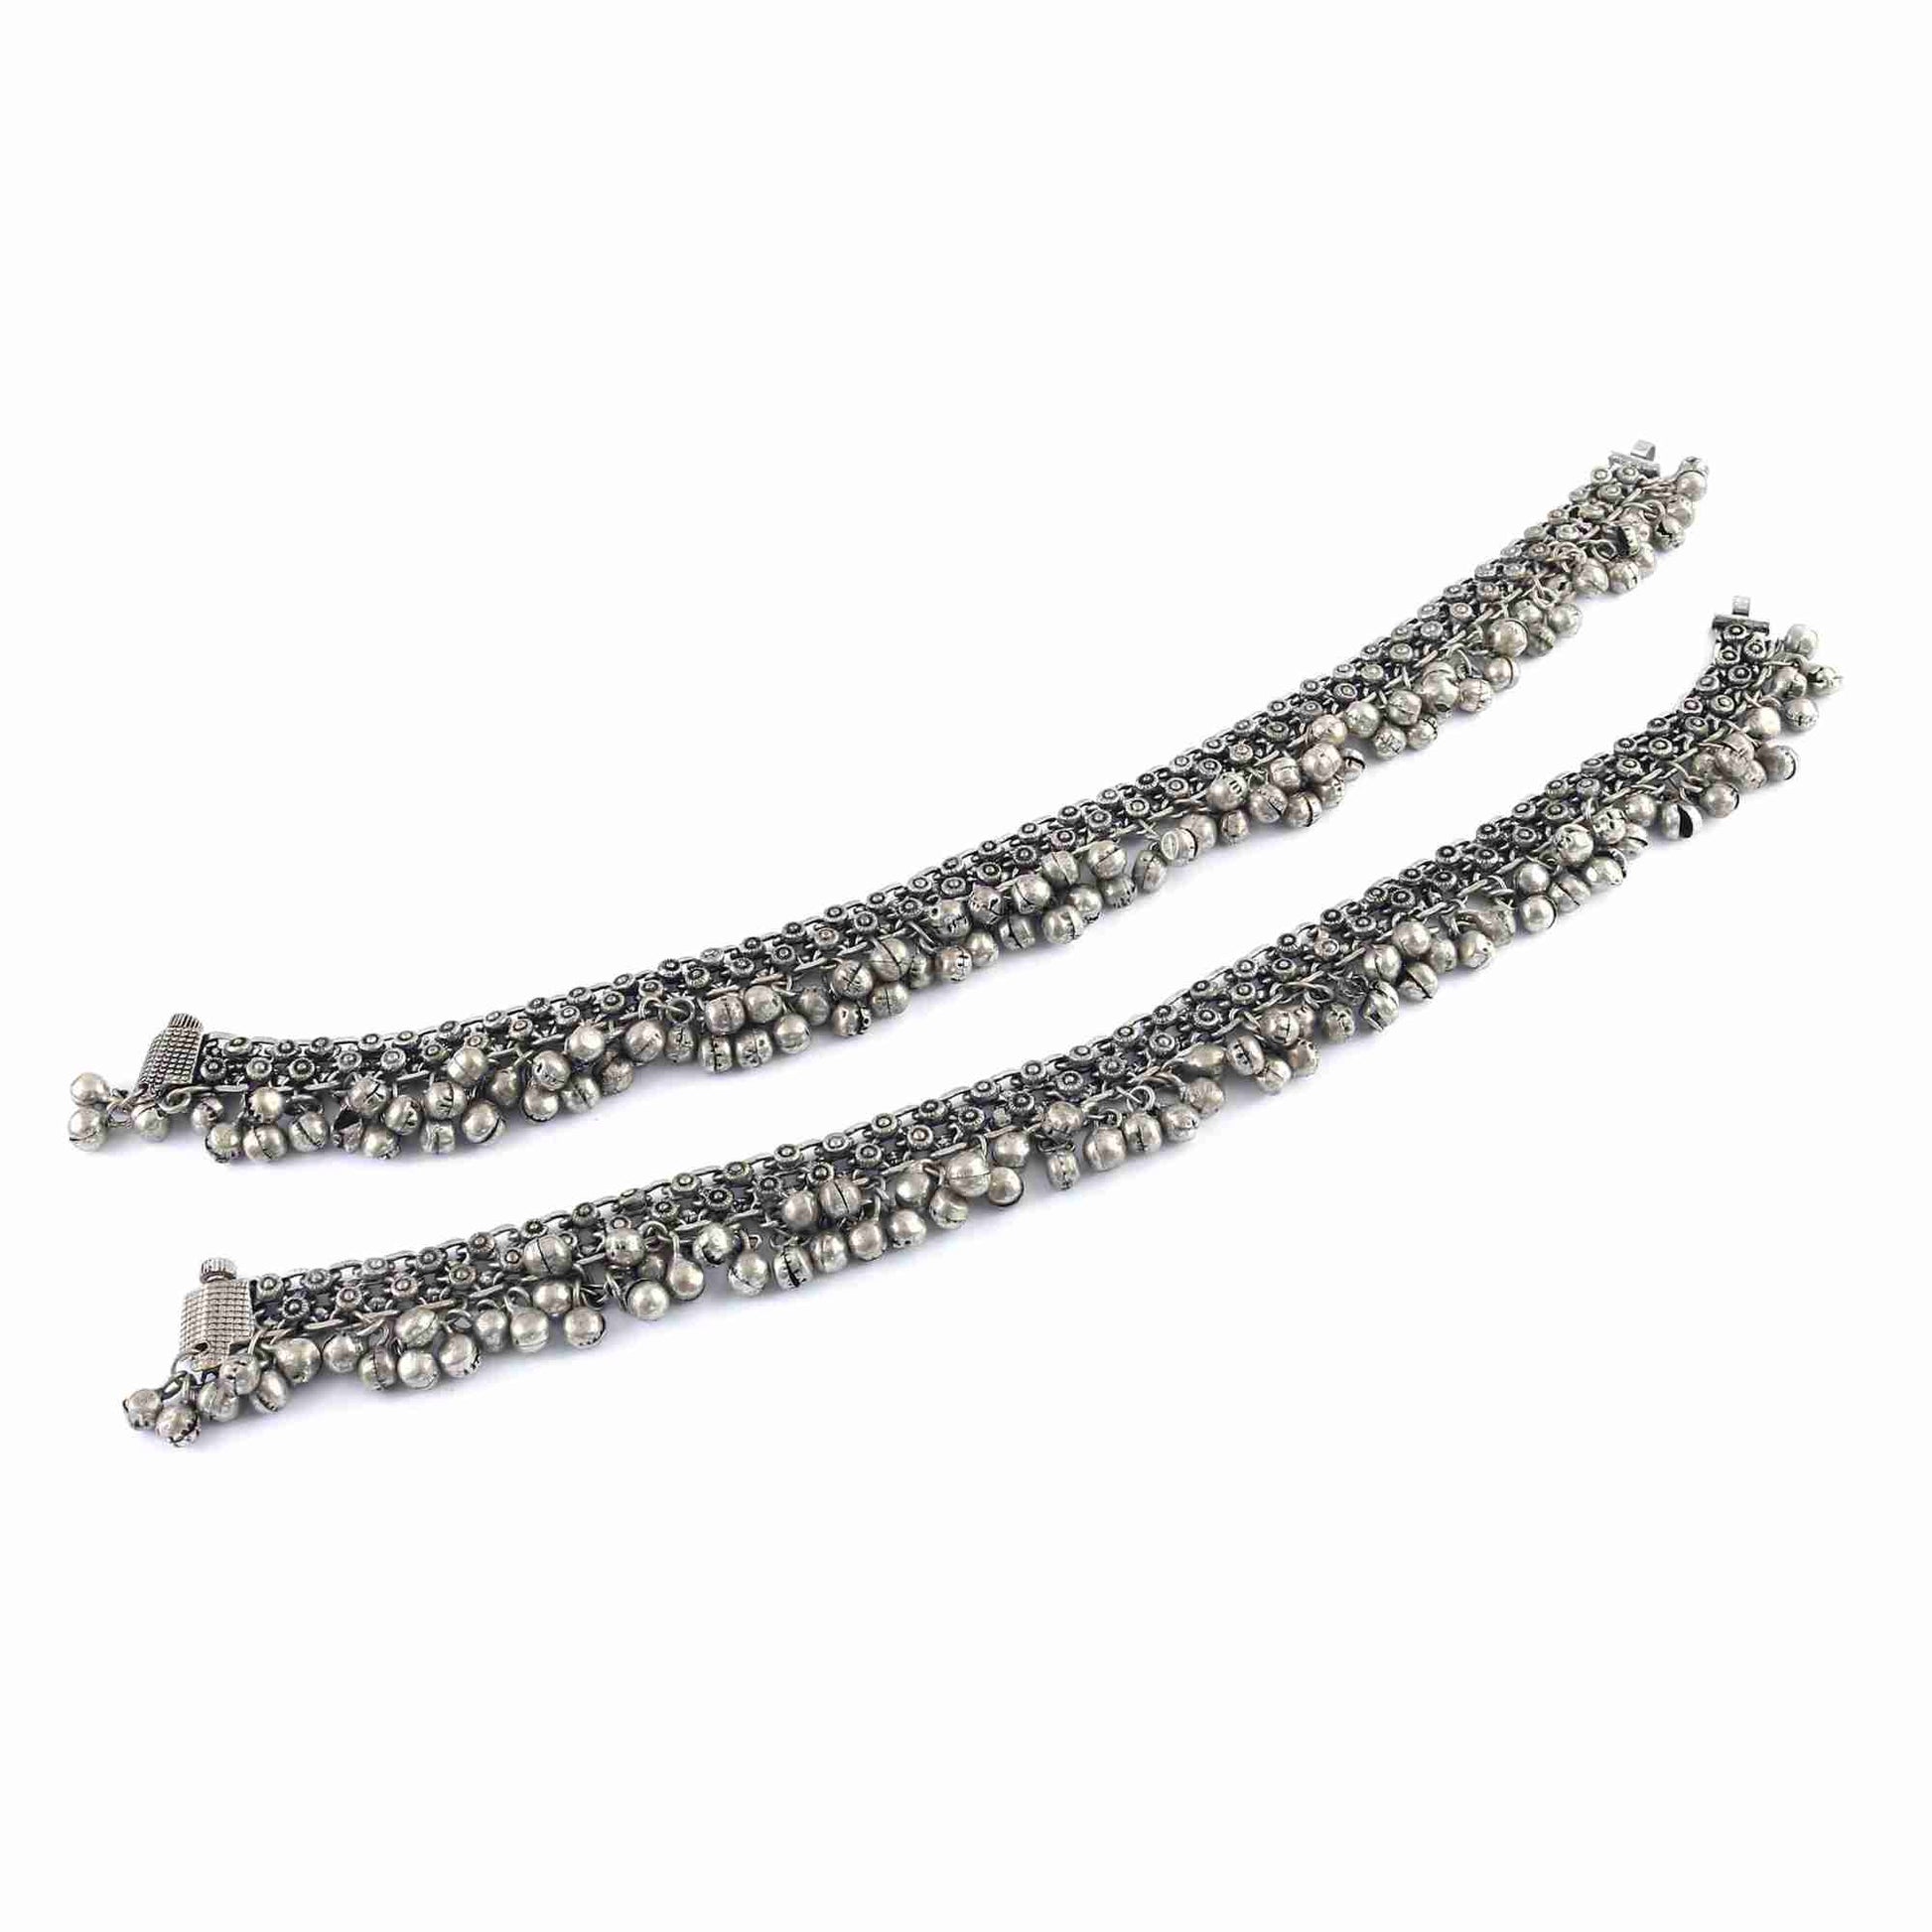 Payal, Indian Payal, Indian Anklets, Silver Jewelry, Silver Payal, Oxidized Payal, Oxidize Silver, Anklet for Women, Gift for Mom, Women